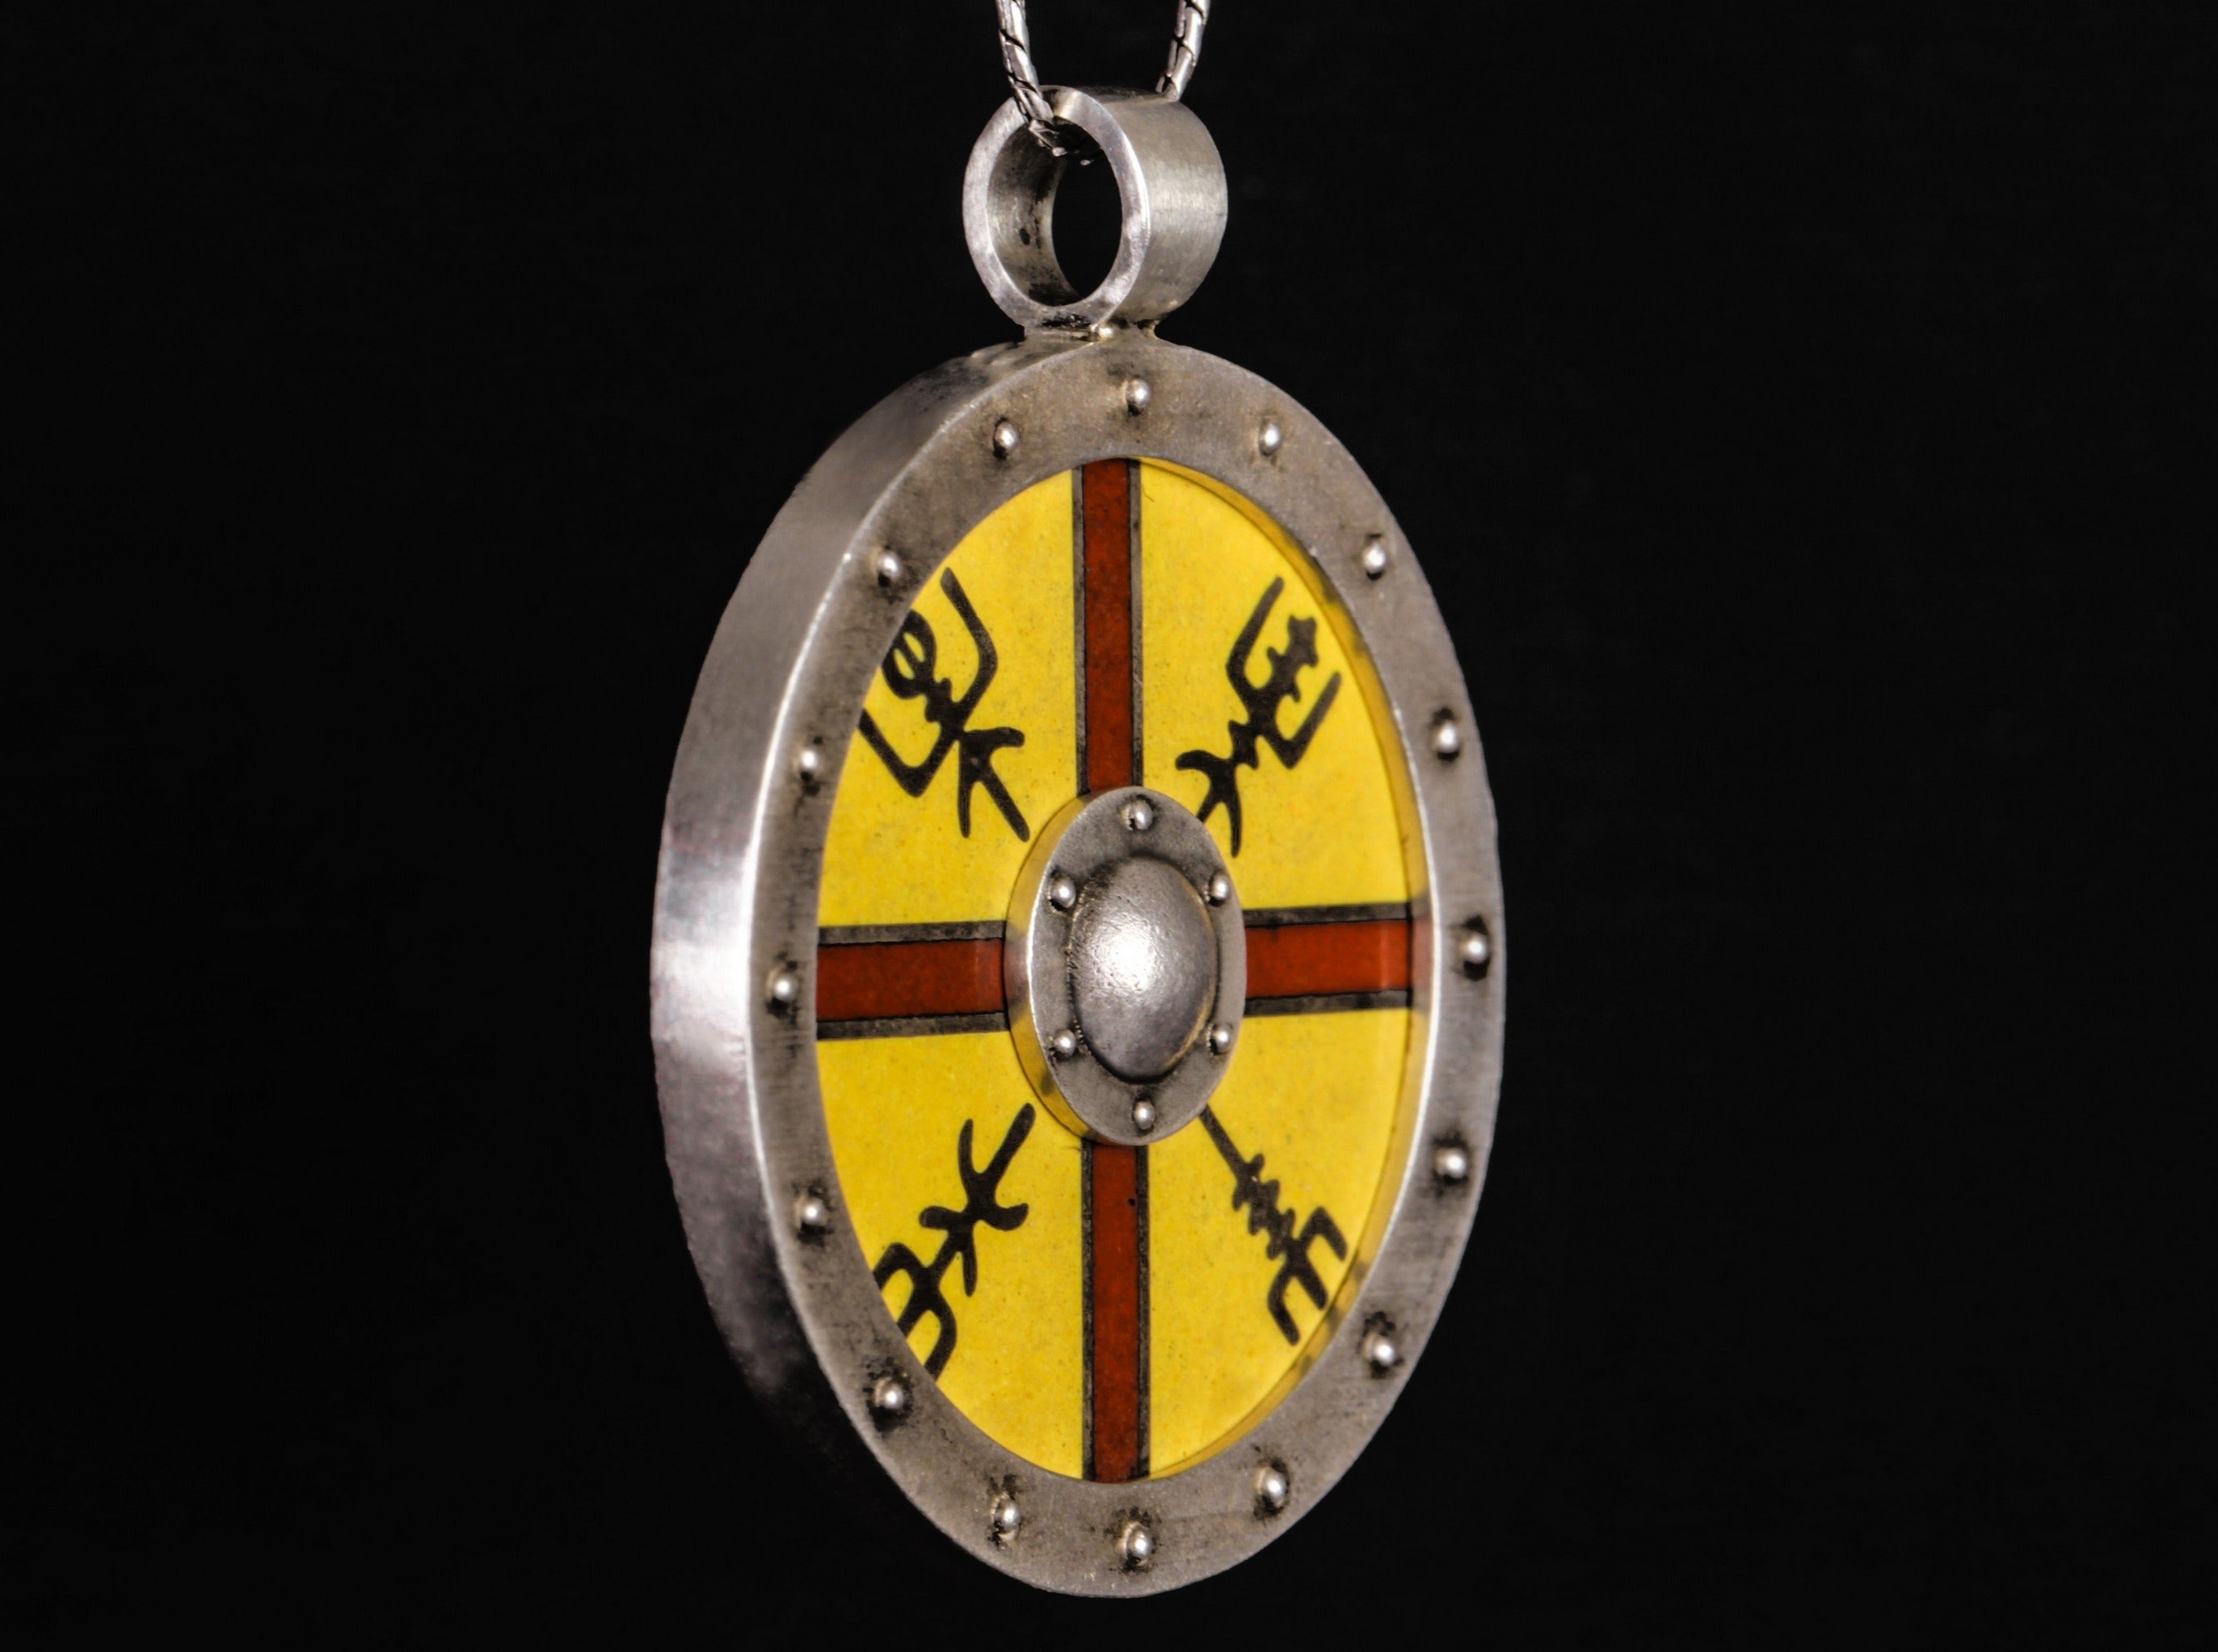 silver shield with red cross and silver runes on the yellow background 